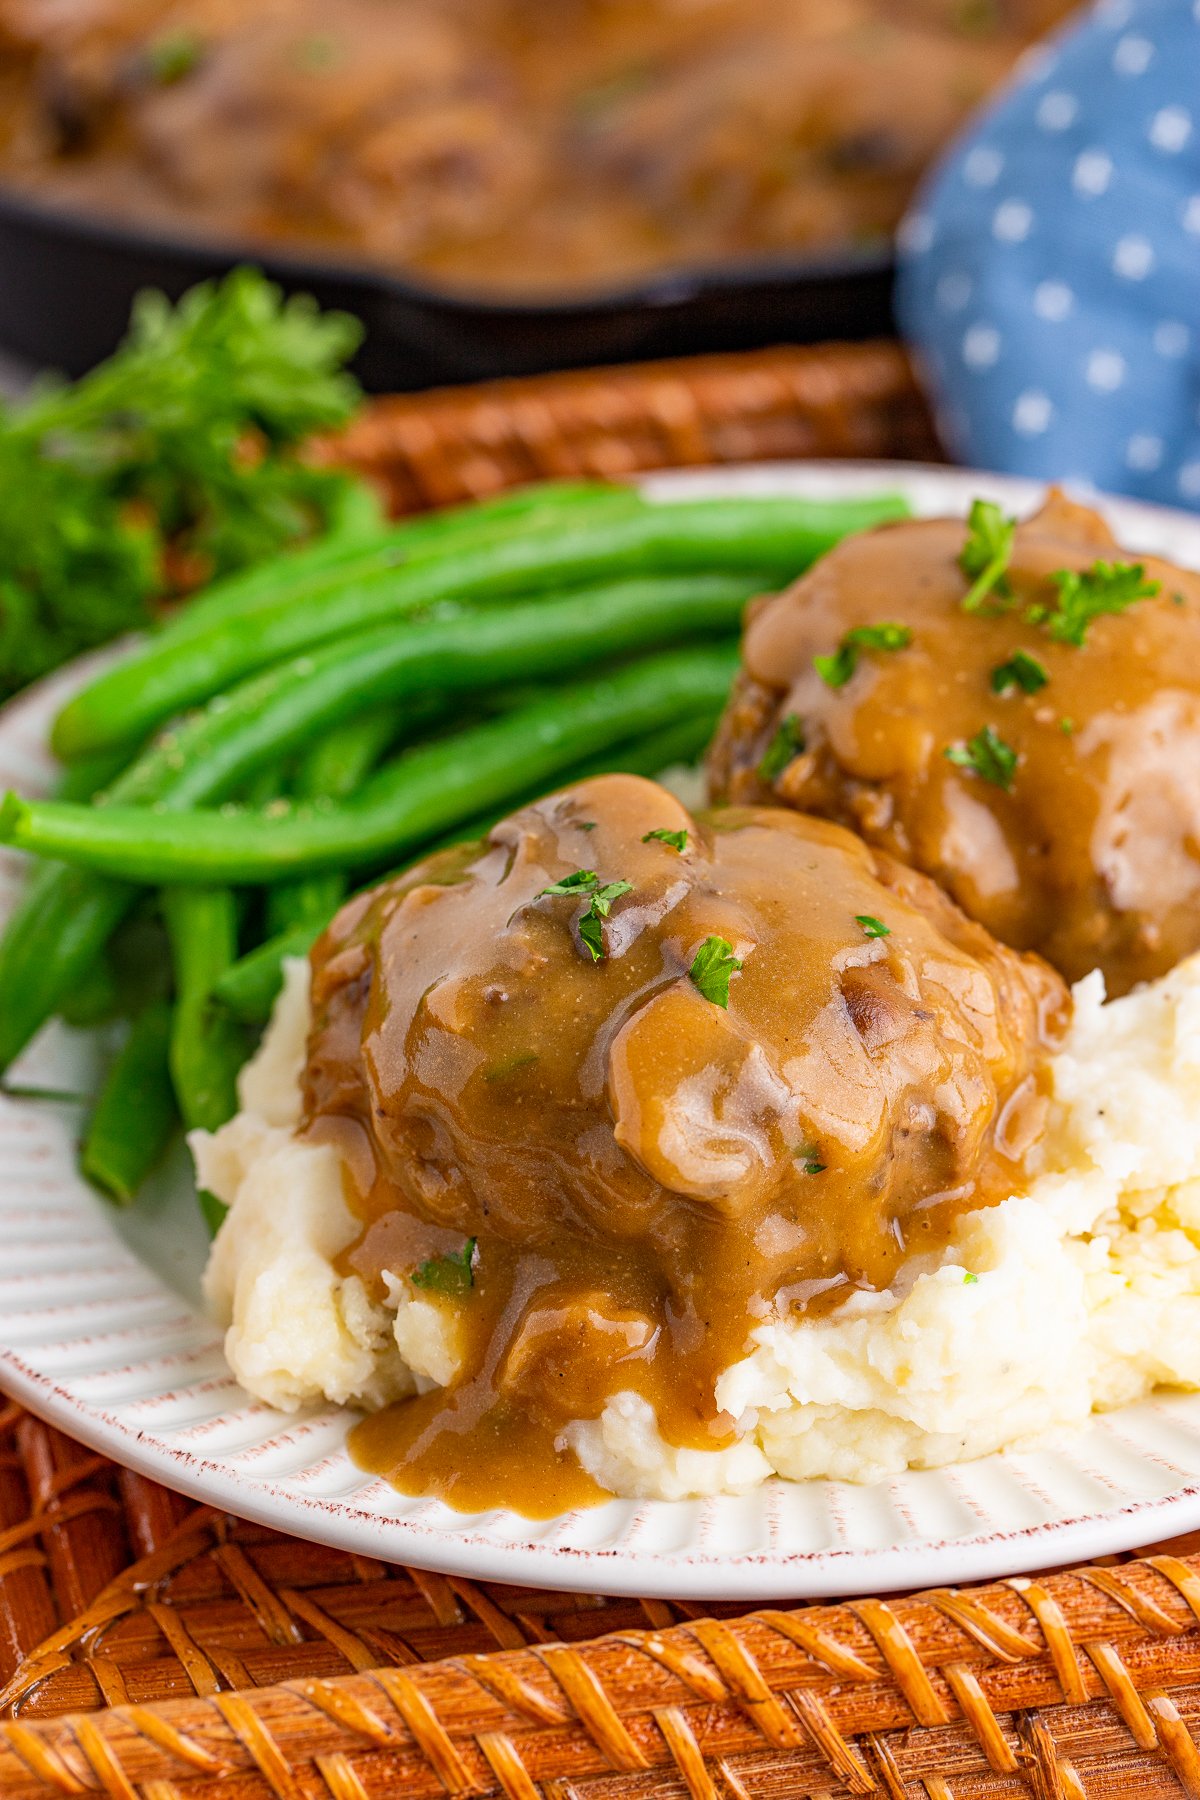 Salisbury Steak Recipe over potatoes with gravy and green beans on plate.